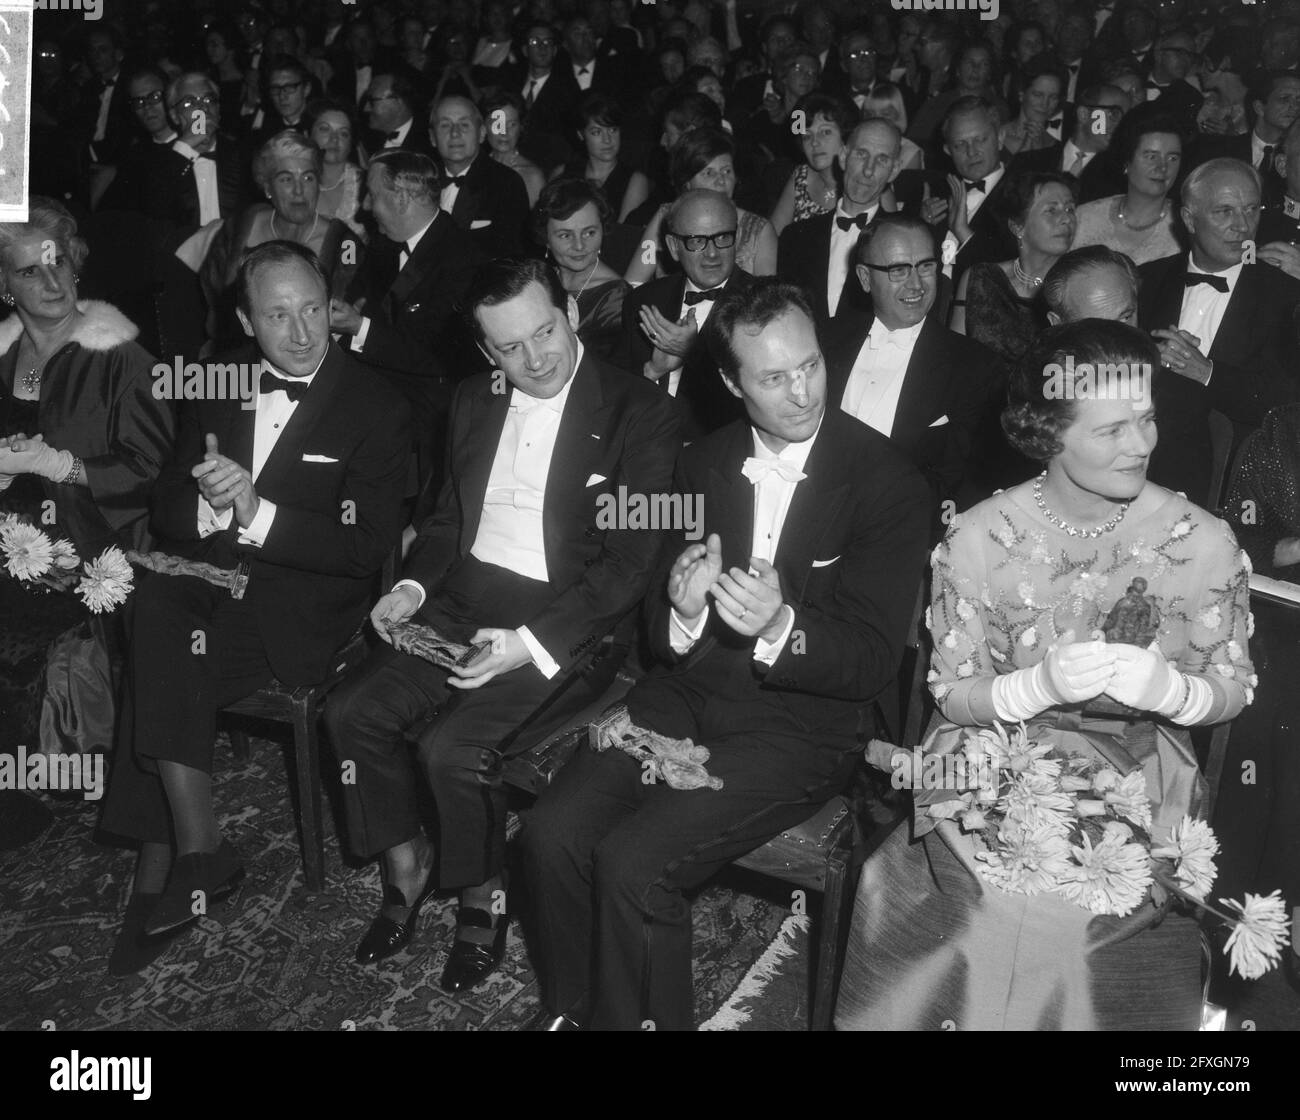 Four Edison winners; from left to right violinists Herman Krebbers and Arthur Grumiaux, conductor Carlo Maria Giulini and Mrs. Soames (daughter of Winston Churchill), October 29, 1965, cultural awards, classical music, musicians, awards, The Netherlands, 20th century press agency photo, news to remember, documentary, historic photography 1945-1990, visual stories, human history of the Twentieth Century, capturing moments in time Stock Photo